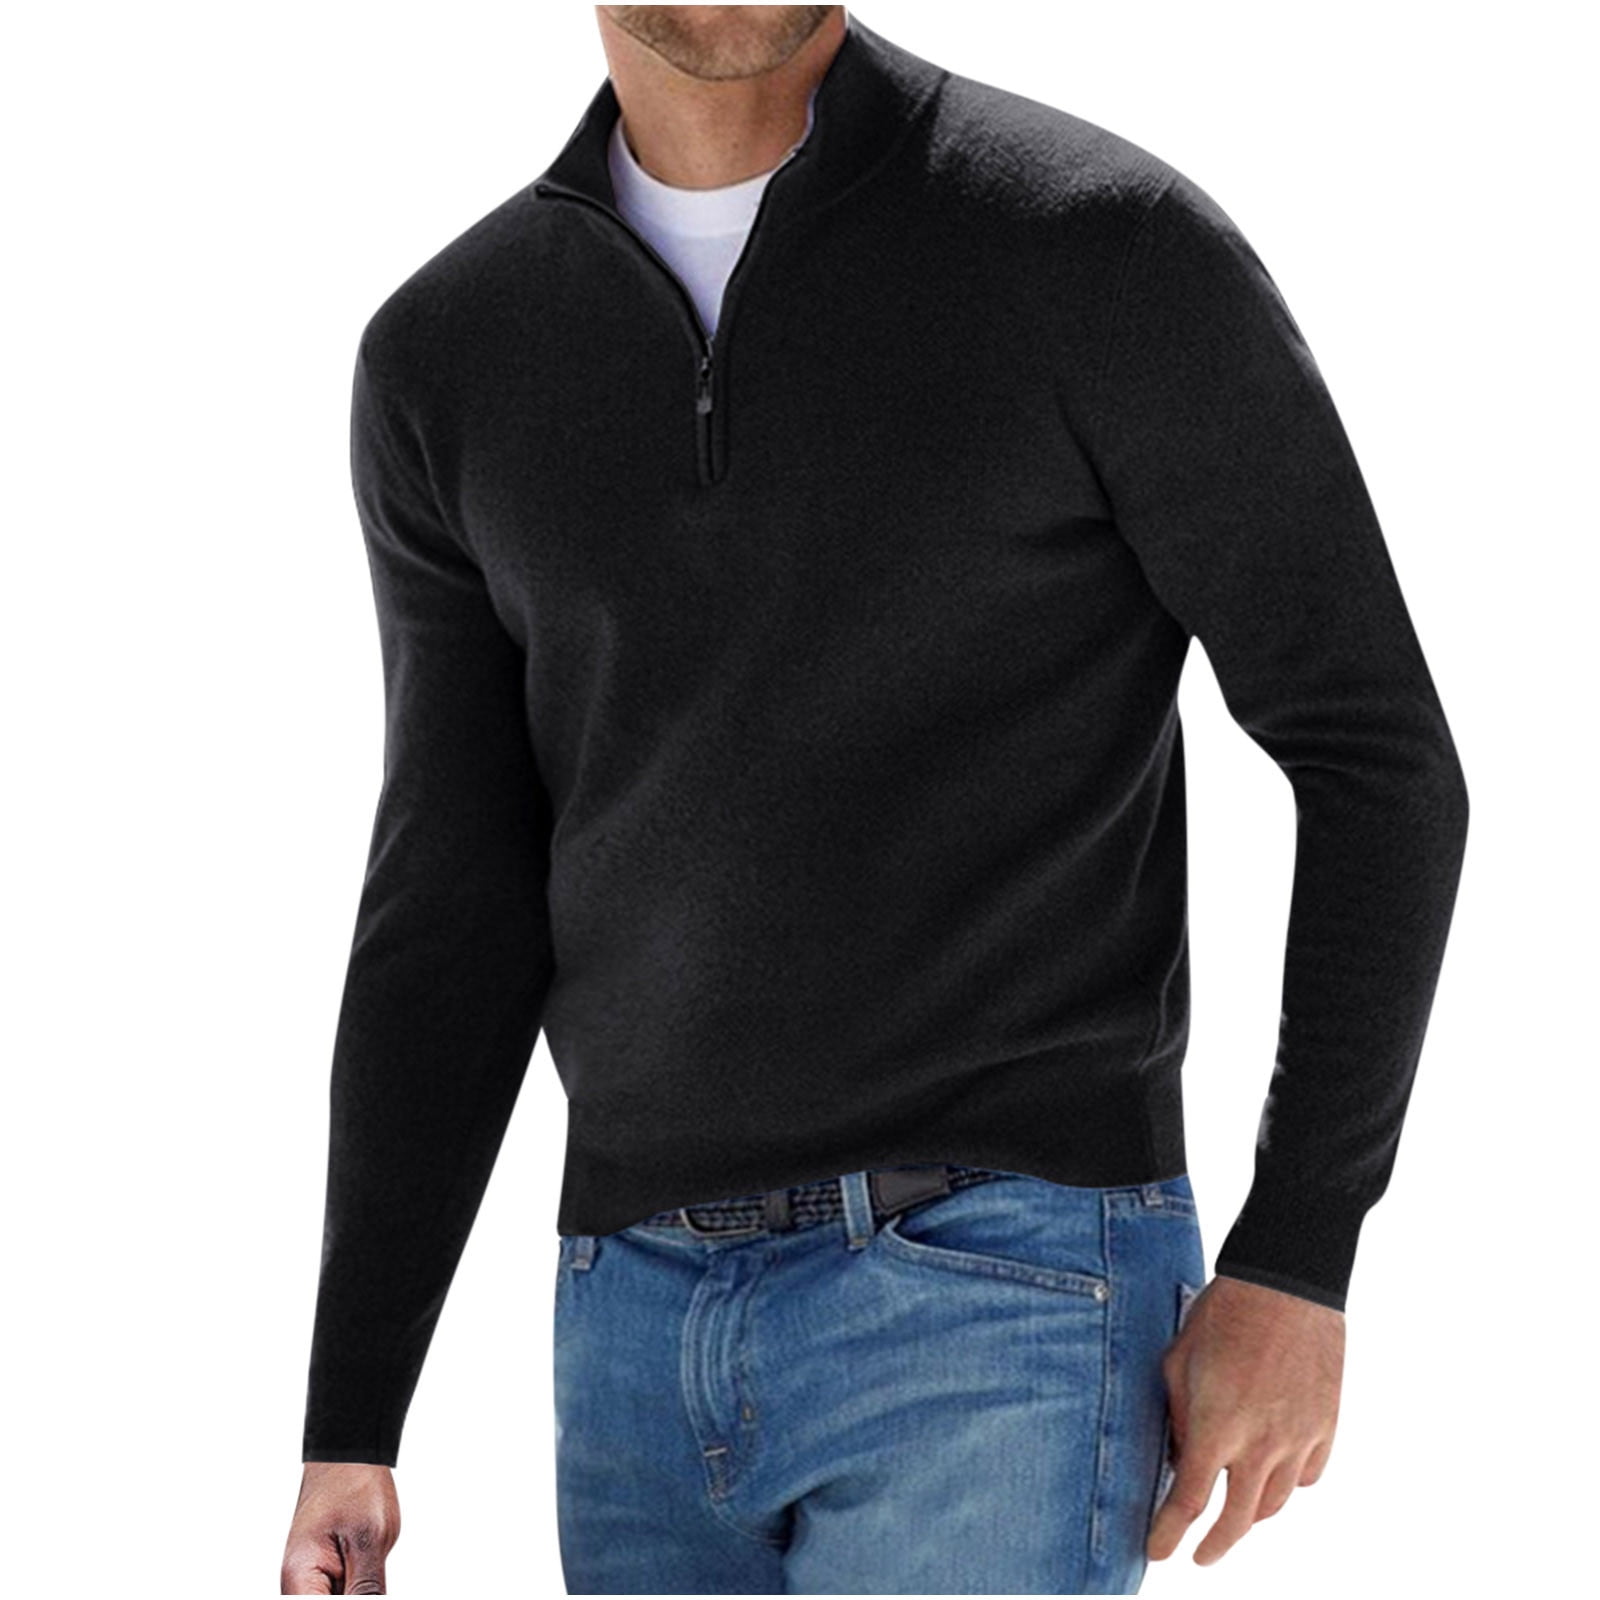 ZCFZJW Men's Slim Fit Turtleneck Sweater Casual Solid Waffle Knitted  Pullover Sweaters Long Sleeve Cashmere Warm Knitwear Tops Blouse Beige XXL  